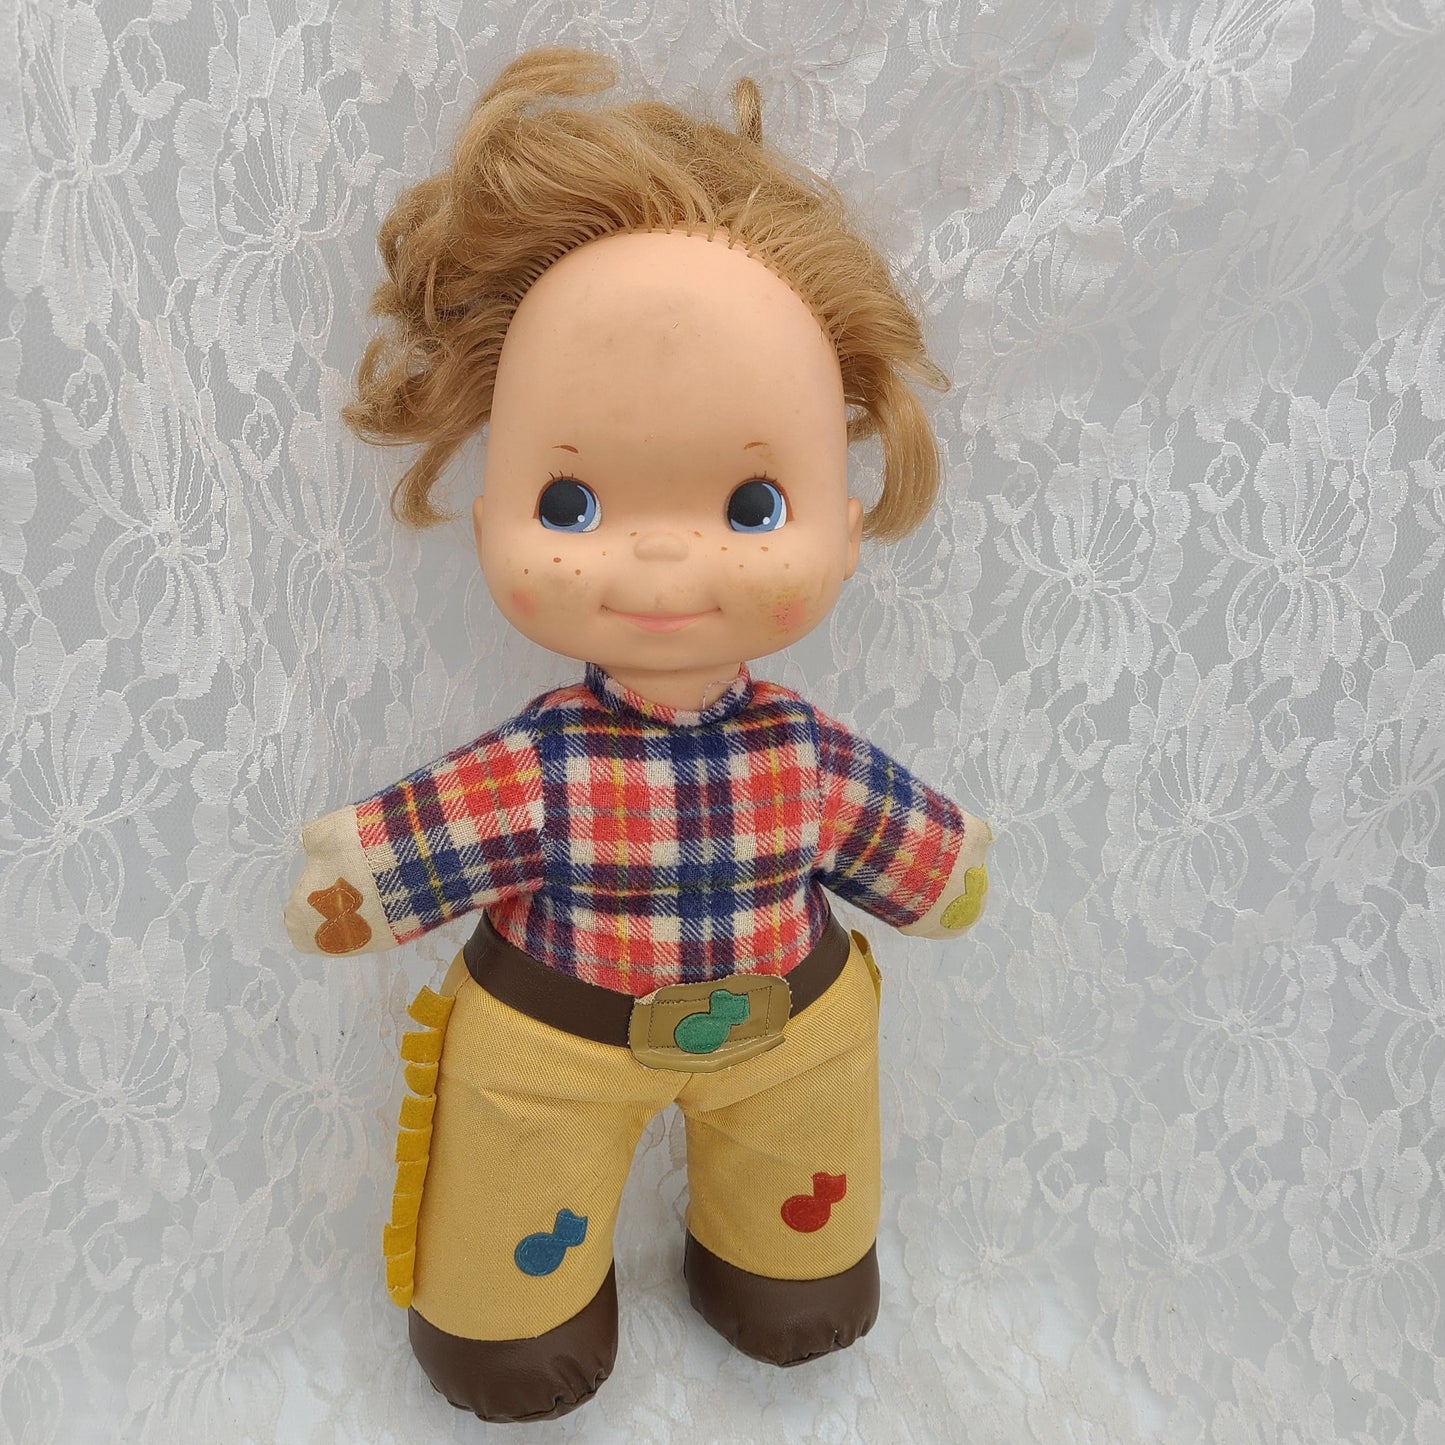 Vintage 1974 Mattel “Love Notes” Cowboy Squeeze Him for SOUNDS ~ 1970s Collectible Doll